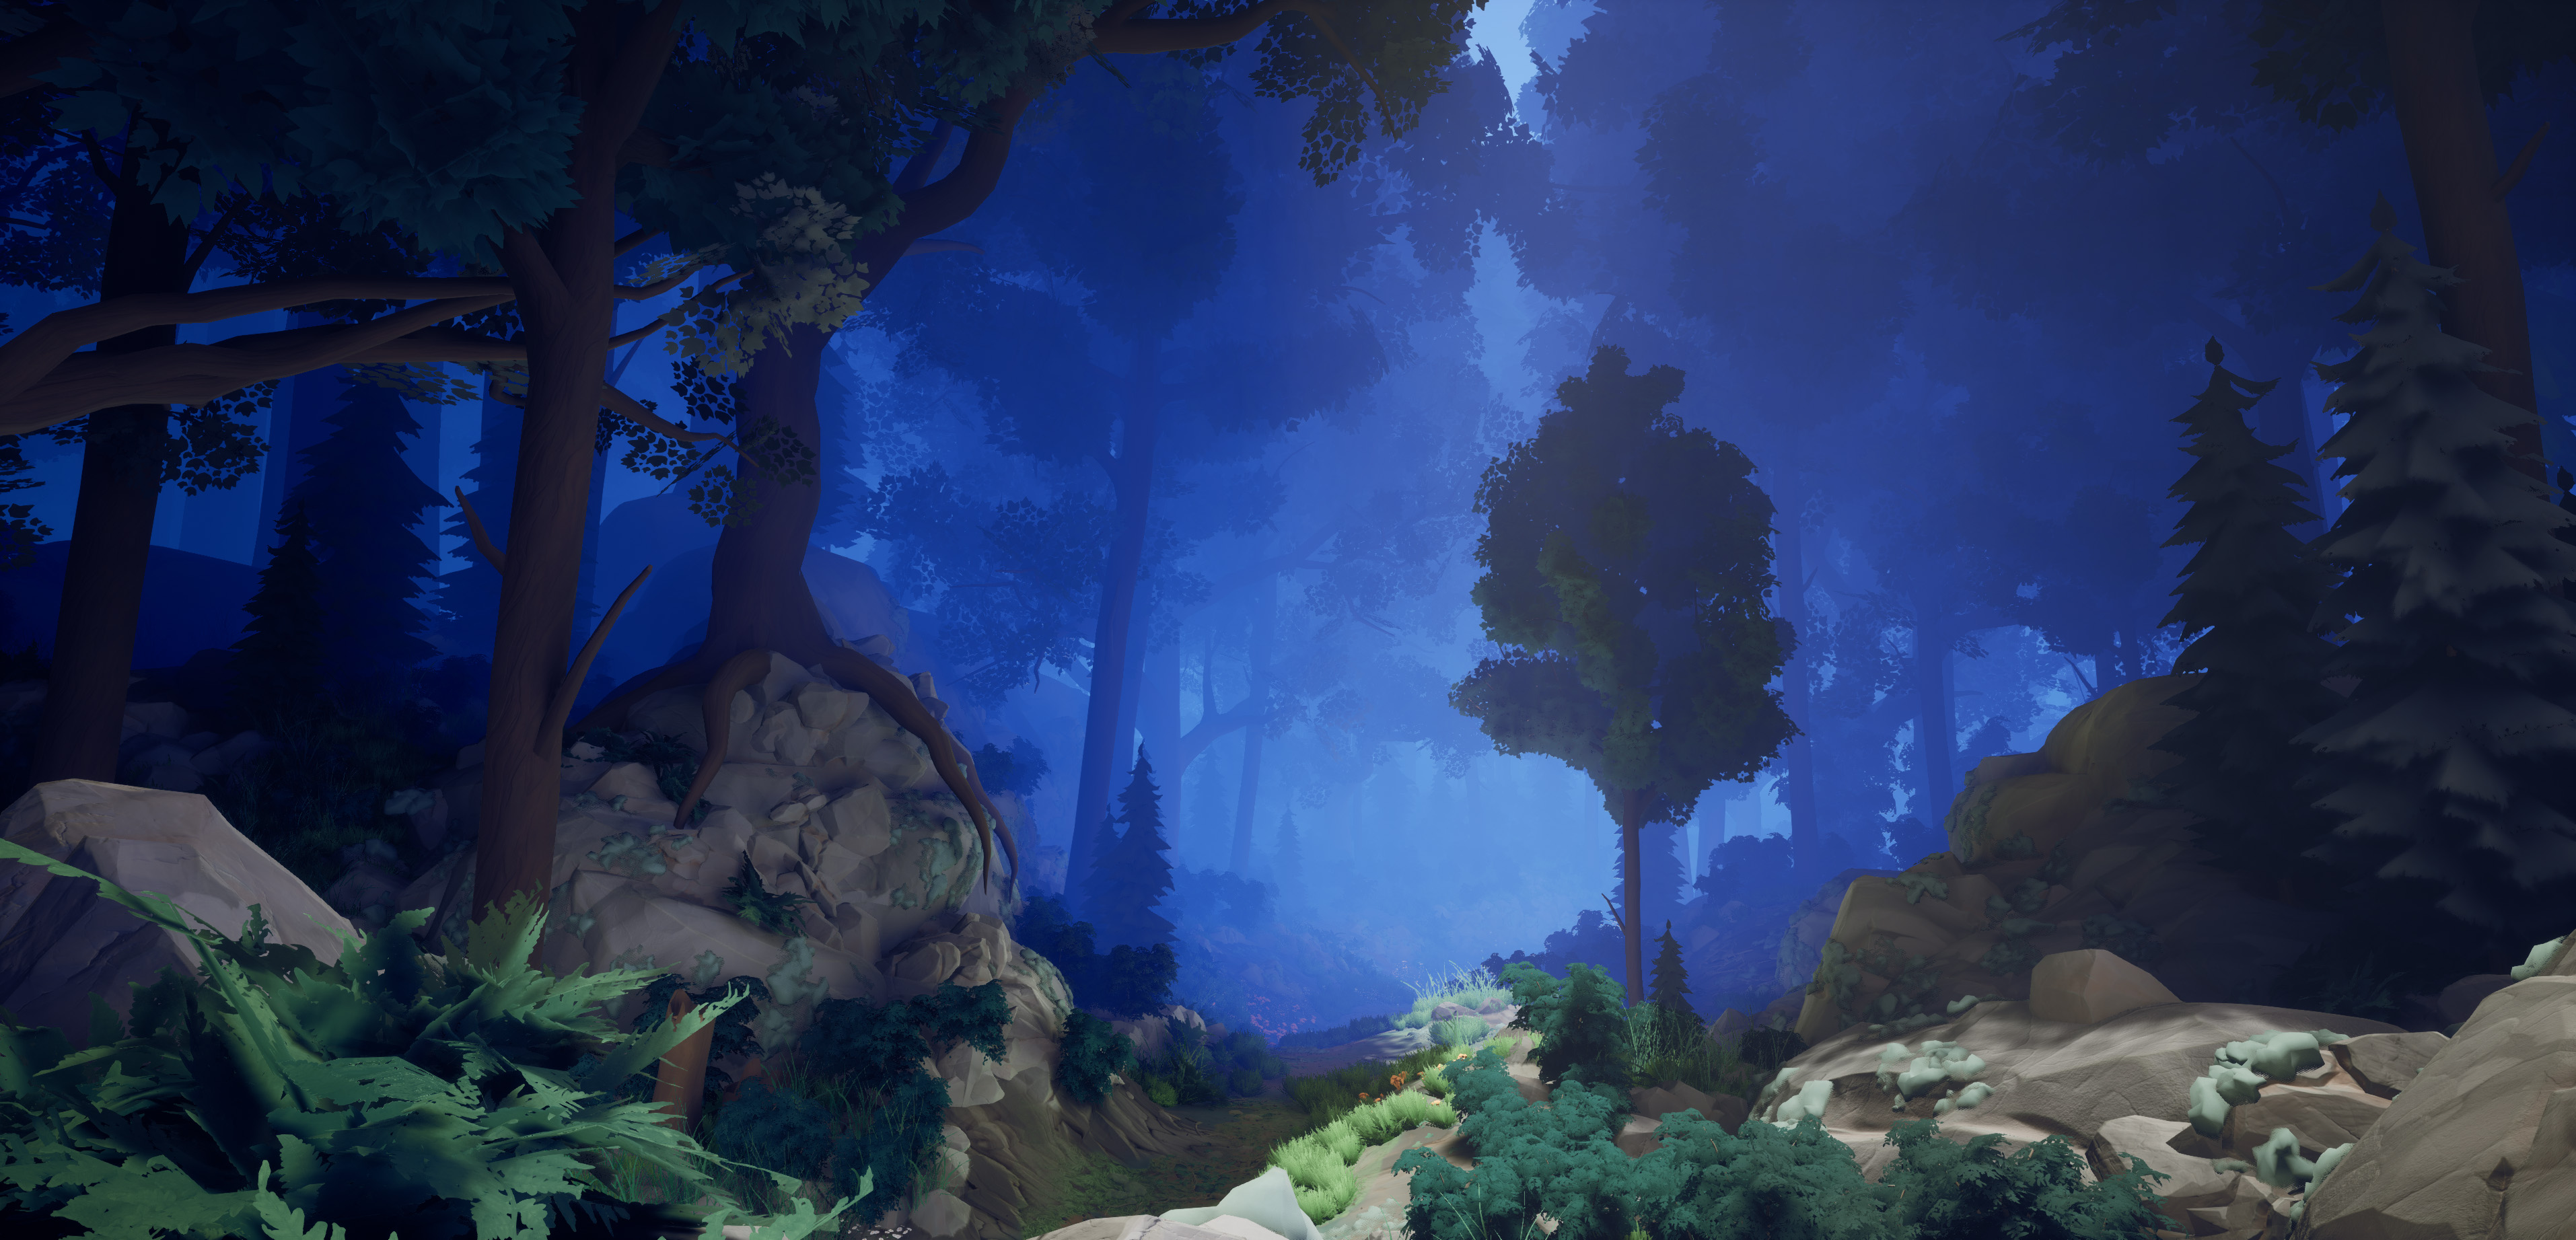 An eerie blue atmosphere envelopes a dense forest in Two Falls. 